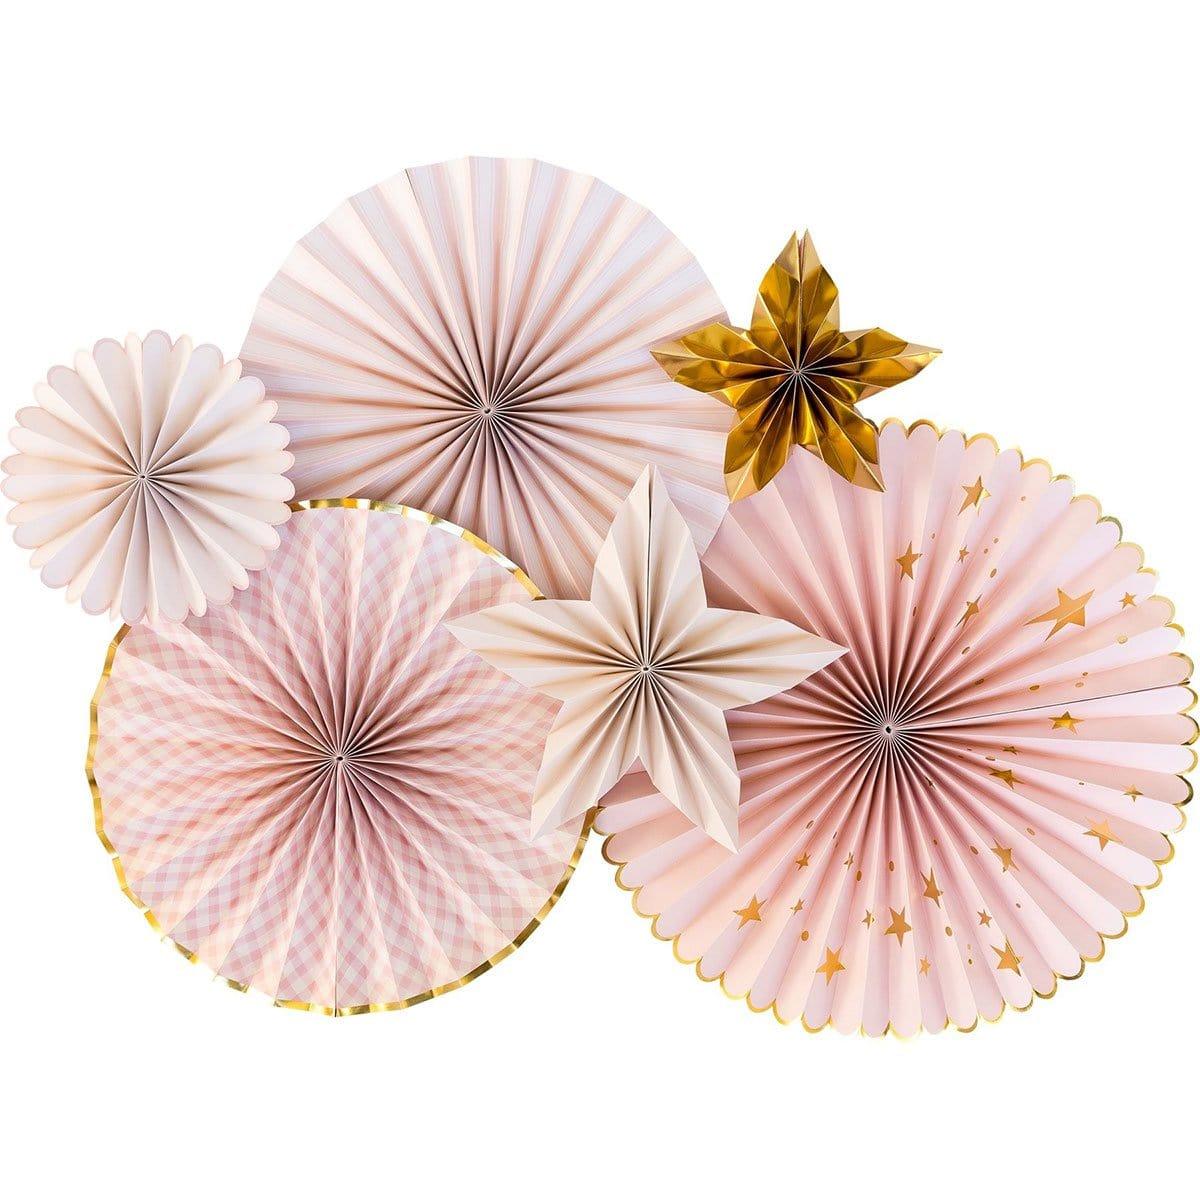 Buy Baby Shower Pink and Gold Paper Fan for Baby Shower sold at Party Expert